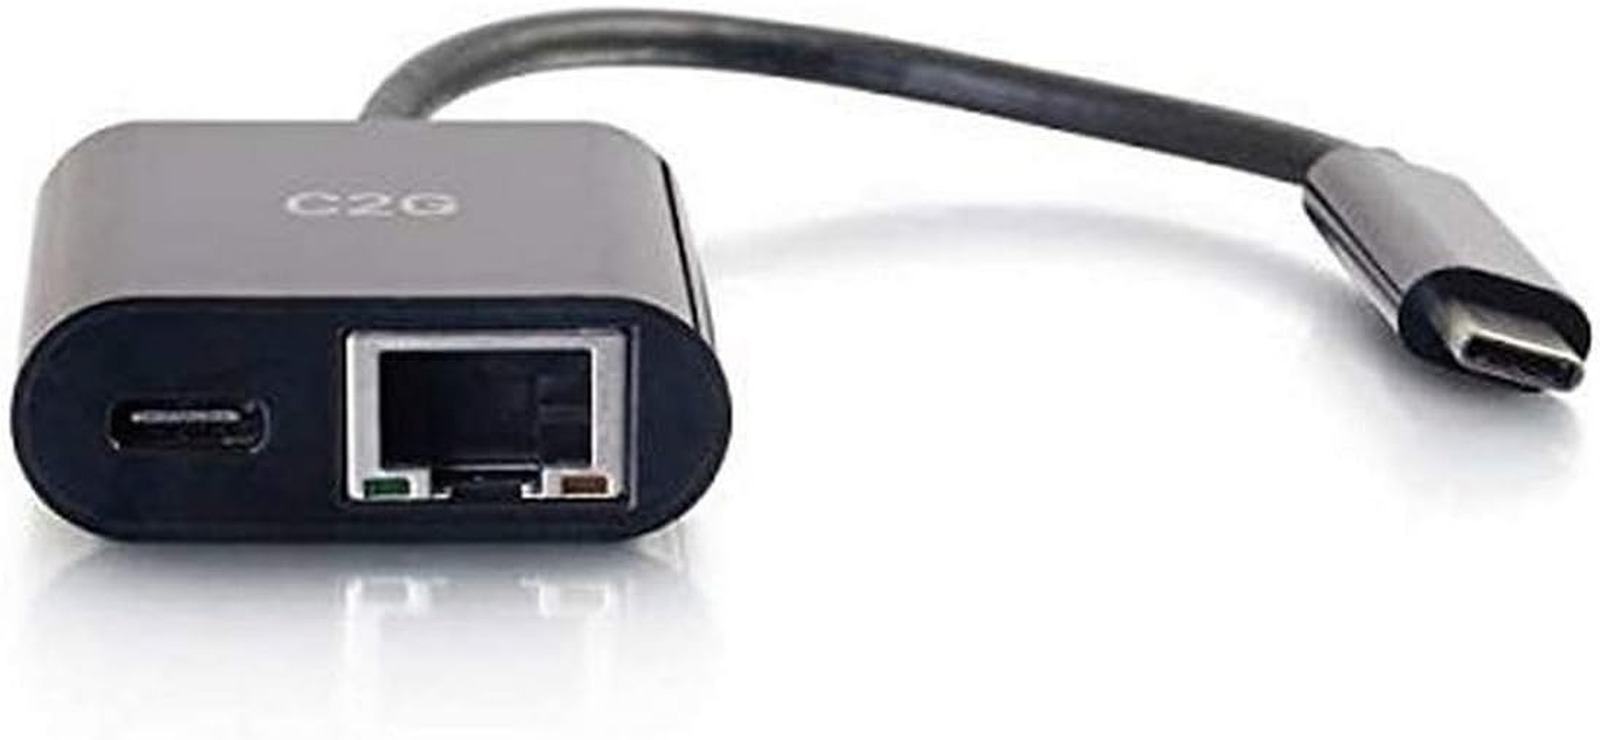 29749 USB C Adapter and Ethernet Adapter with Power, Black